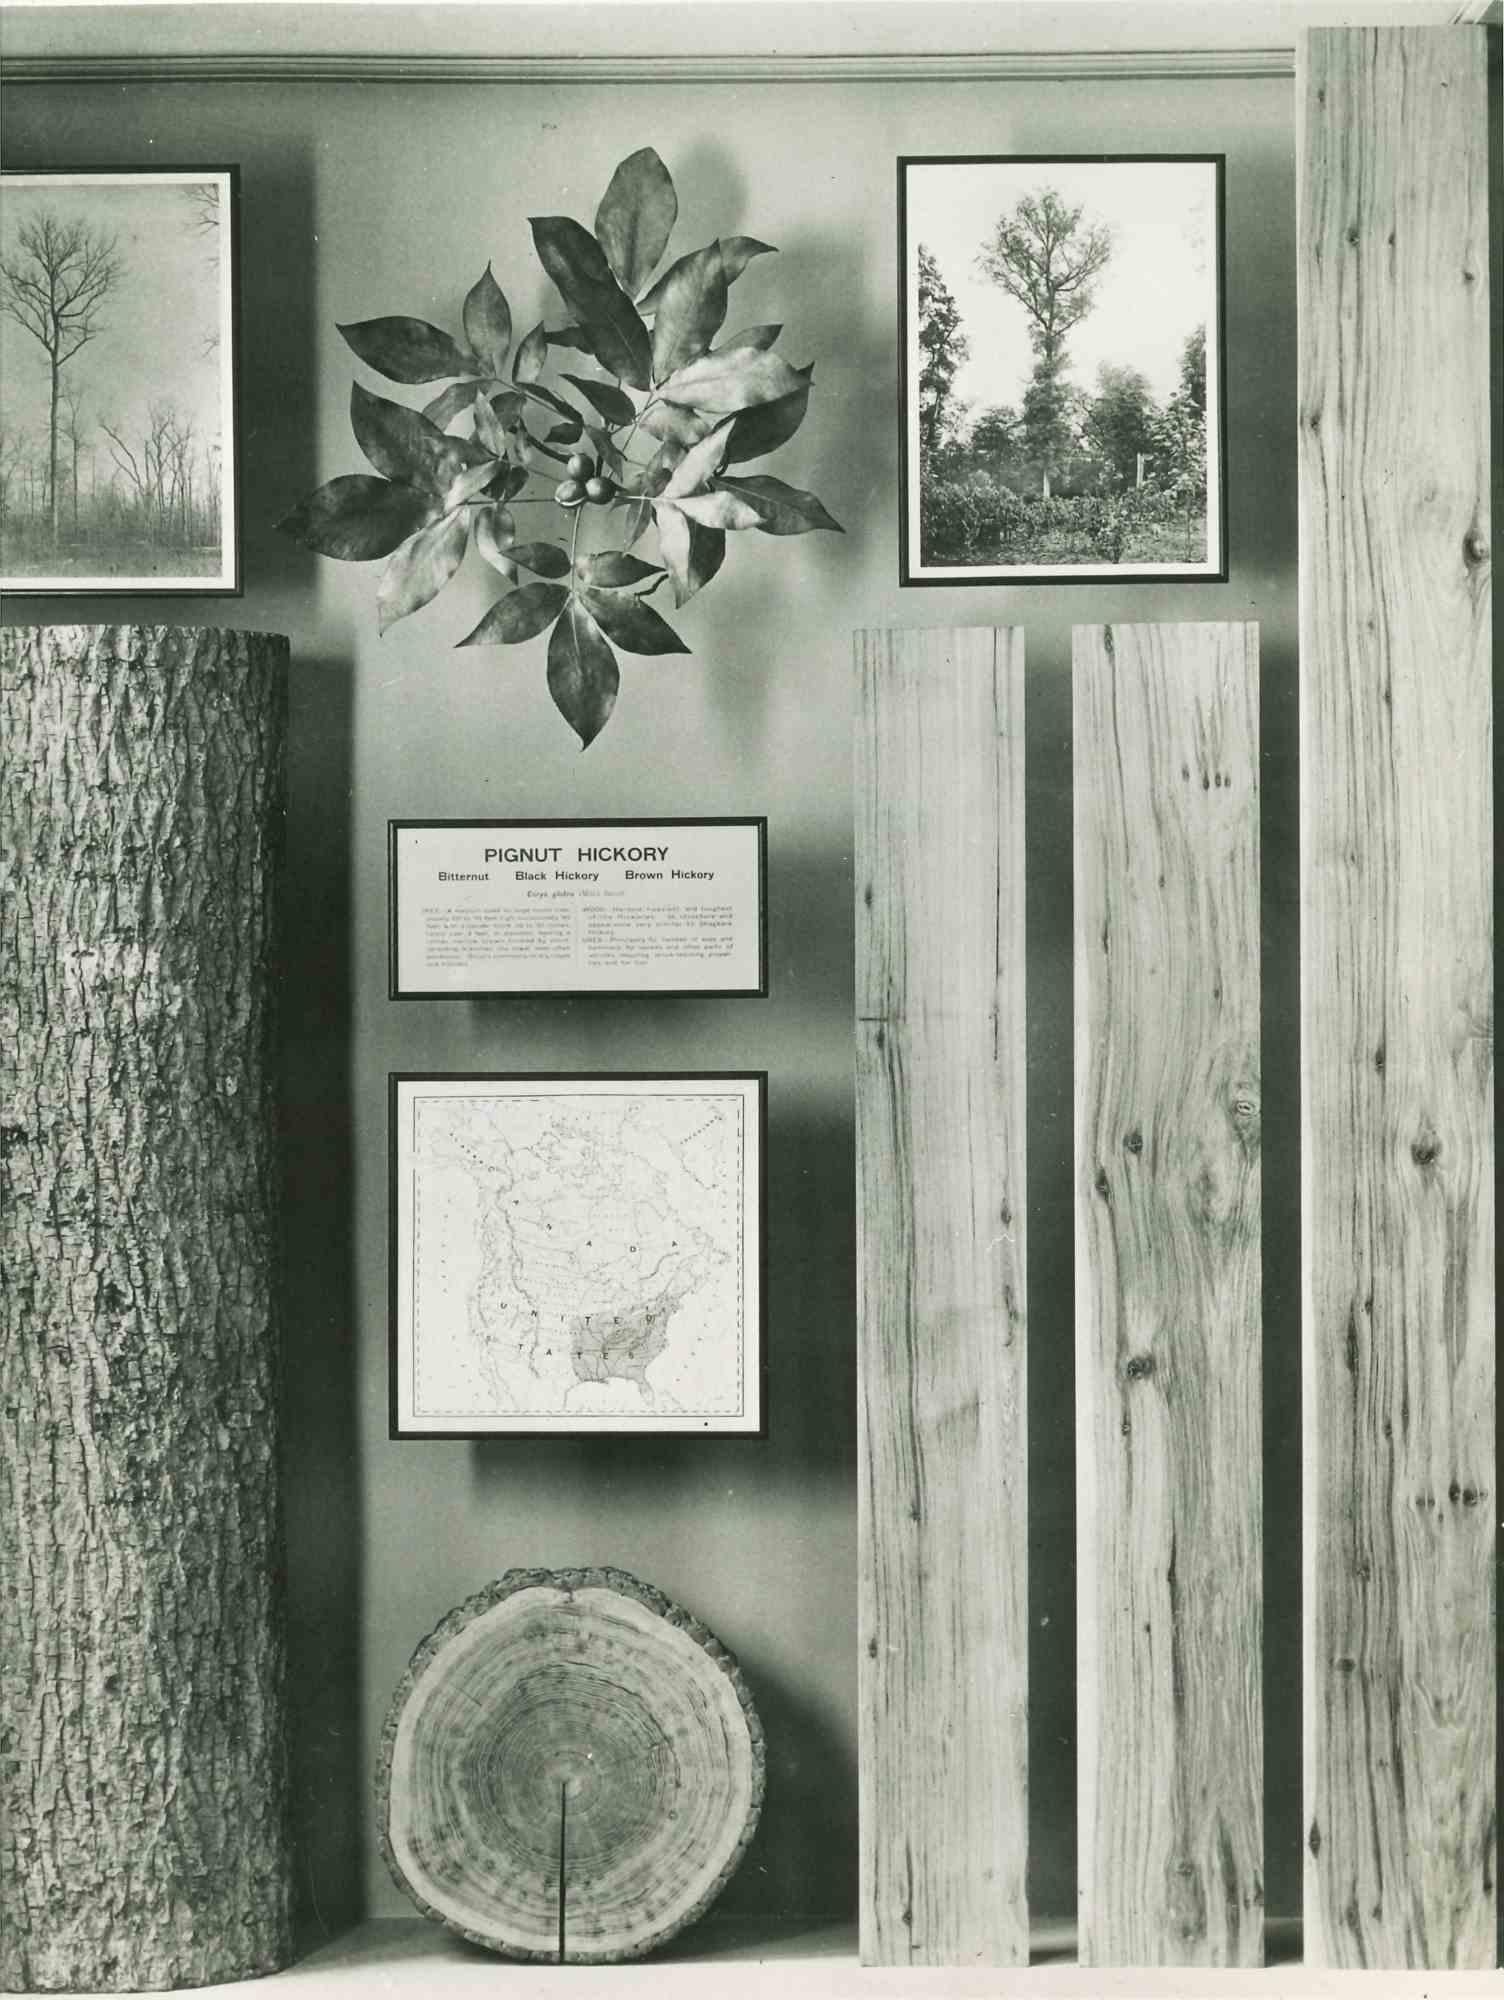 Unknown Figurative Photograph - American Museum of Trees - Vintage Photograph - Mid 20th Century